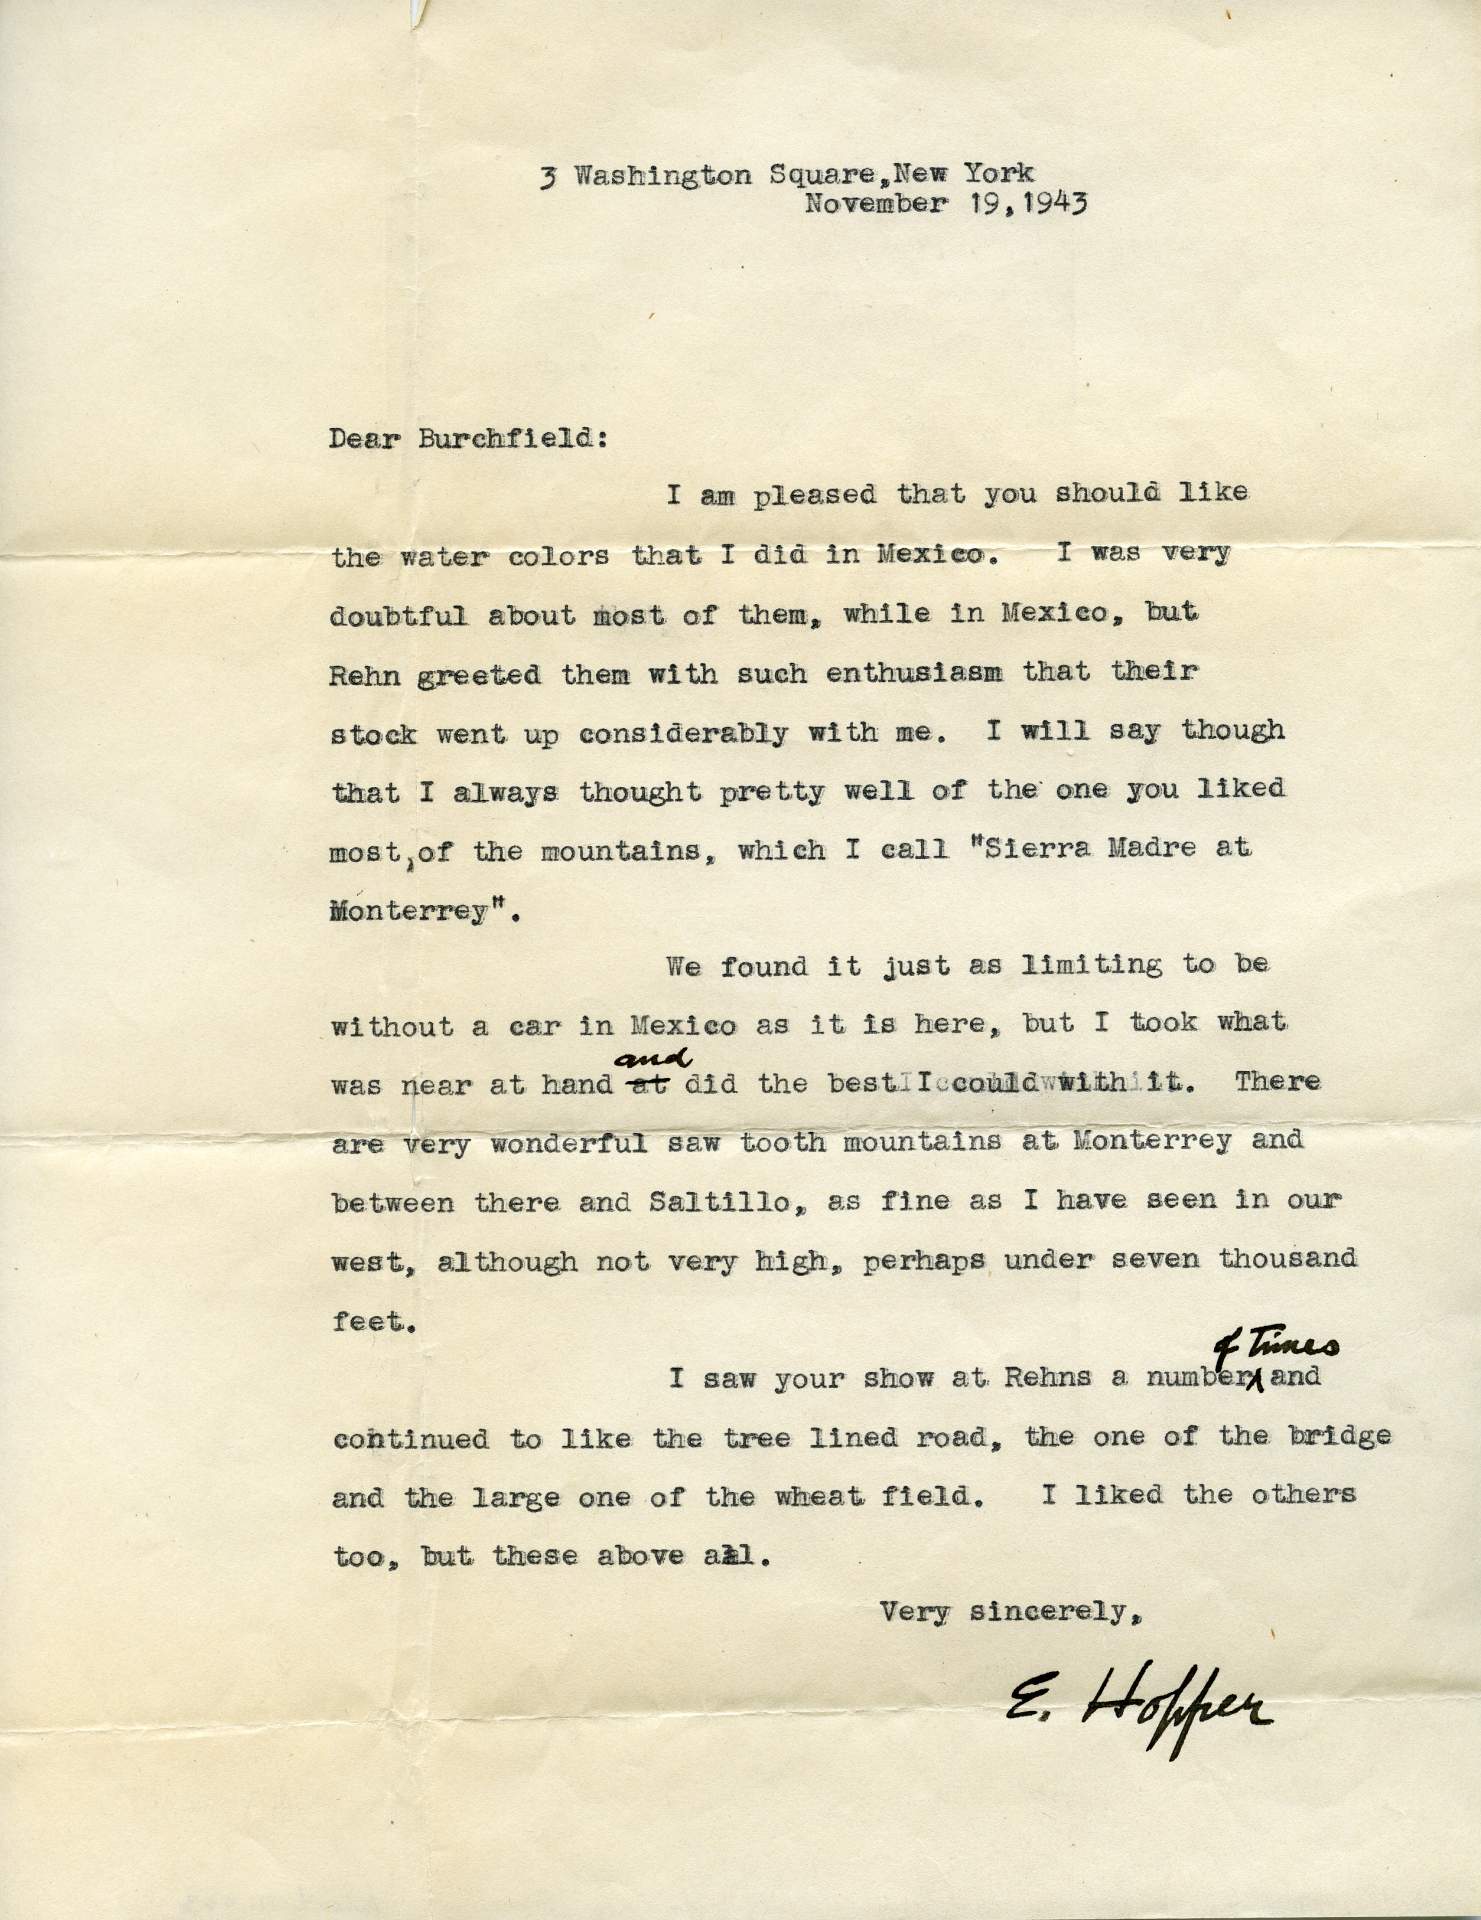 Letter to Charles E. Burchfield